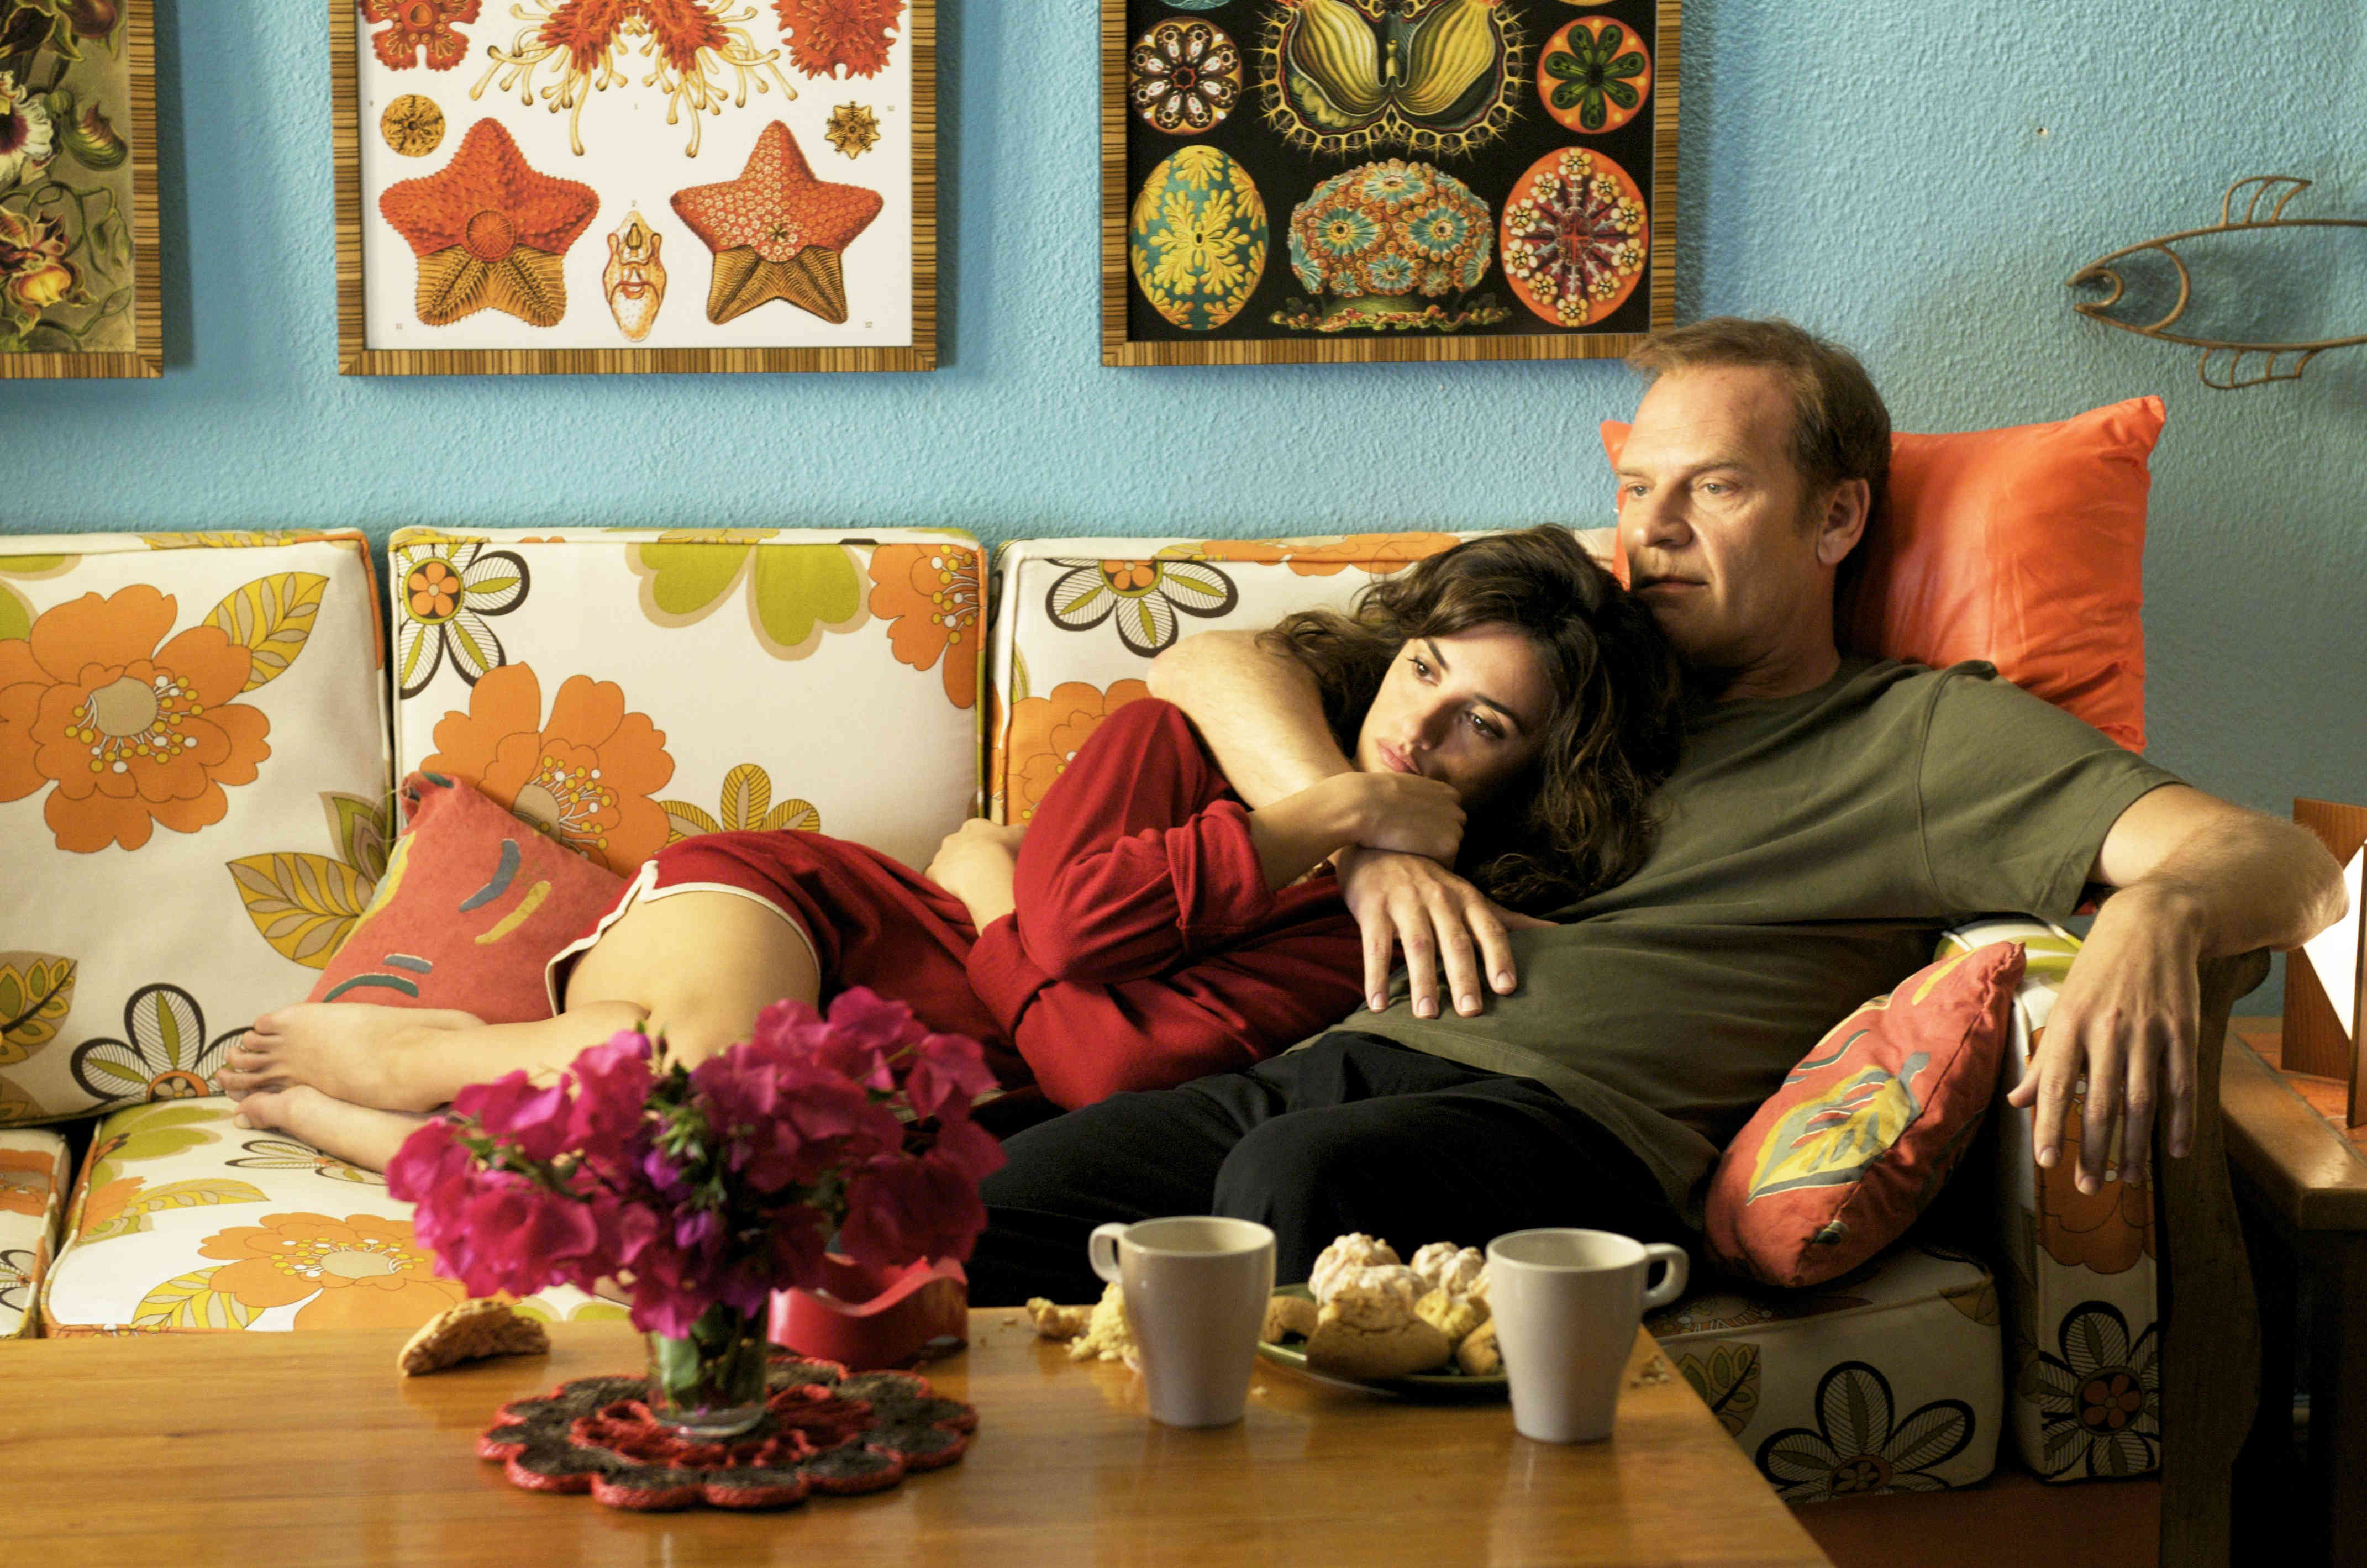 Penelope Cruz stars as Lena and Lluis Homar stars as Mateo Blanco / Harry Caine in Sony Pictures Classics' Broken Embraces (2009)